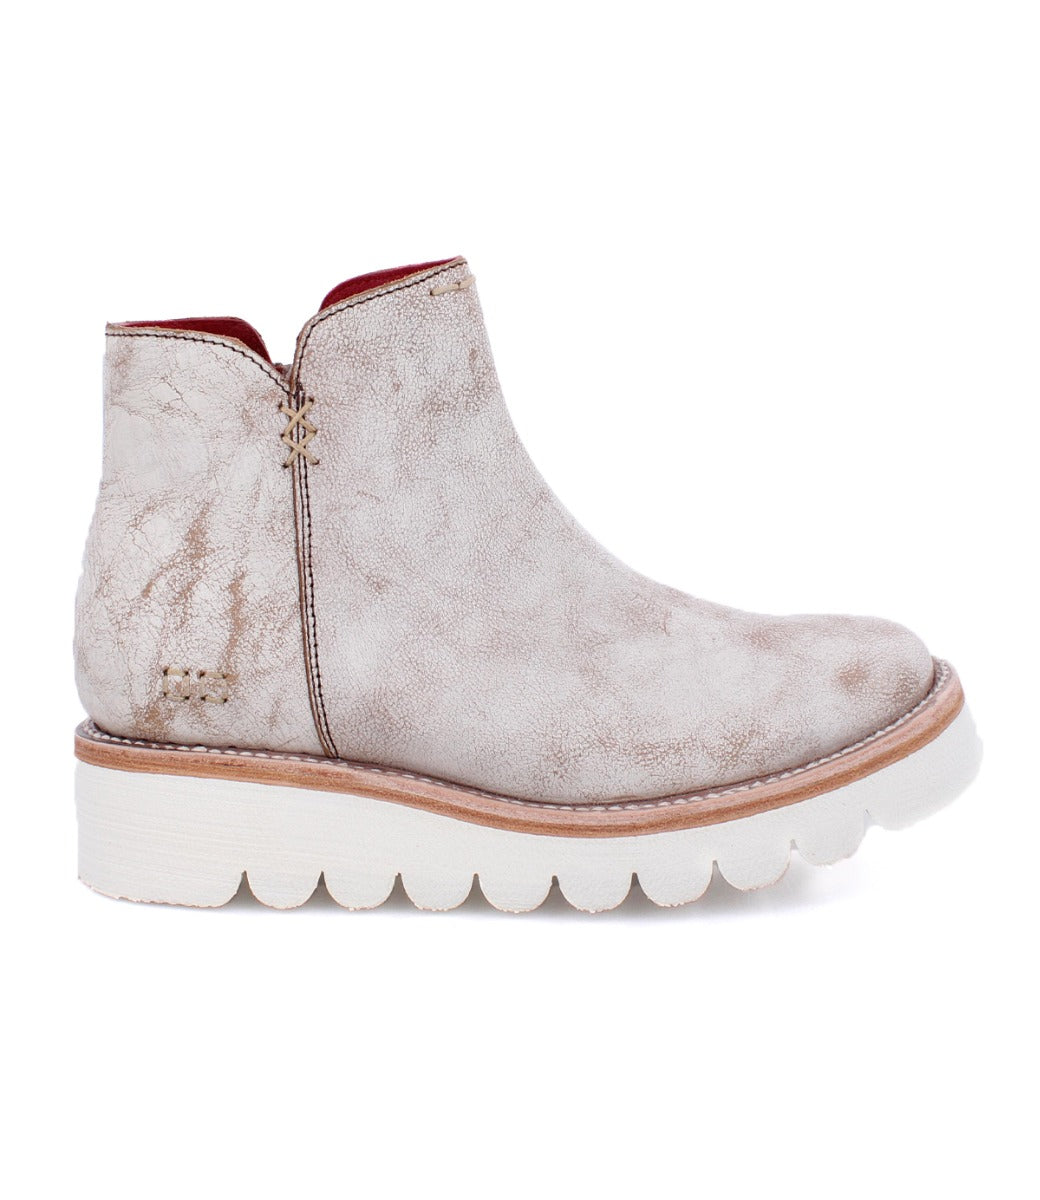 A women's white ankle boot with a white sole, called the Lydyi by Bed Stu.